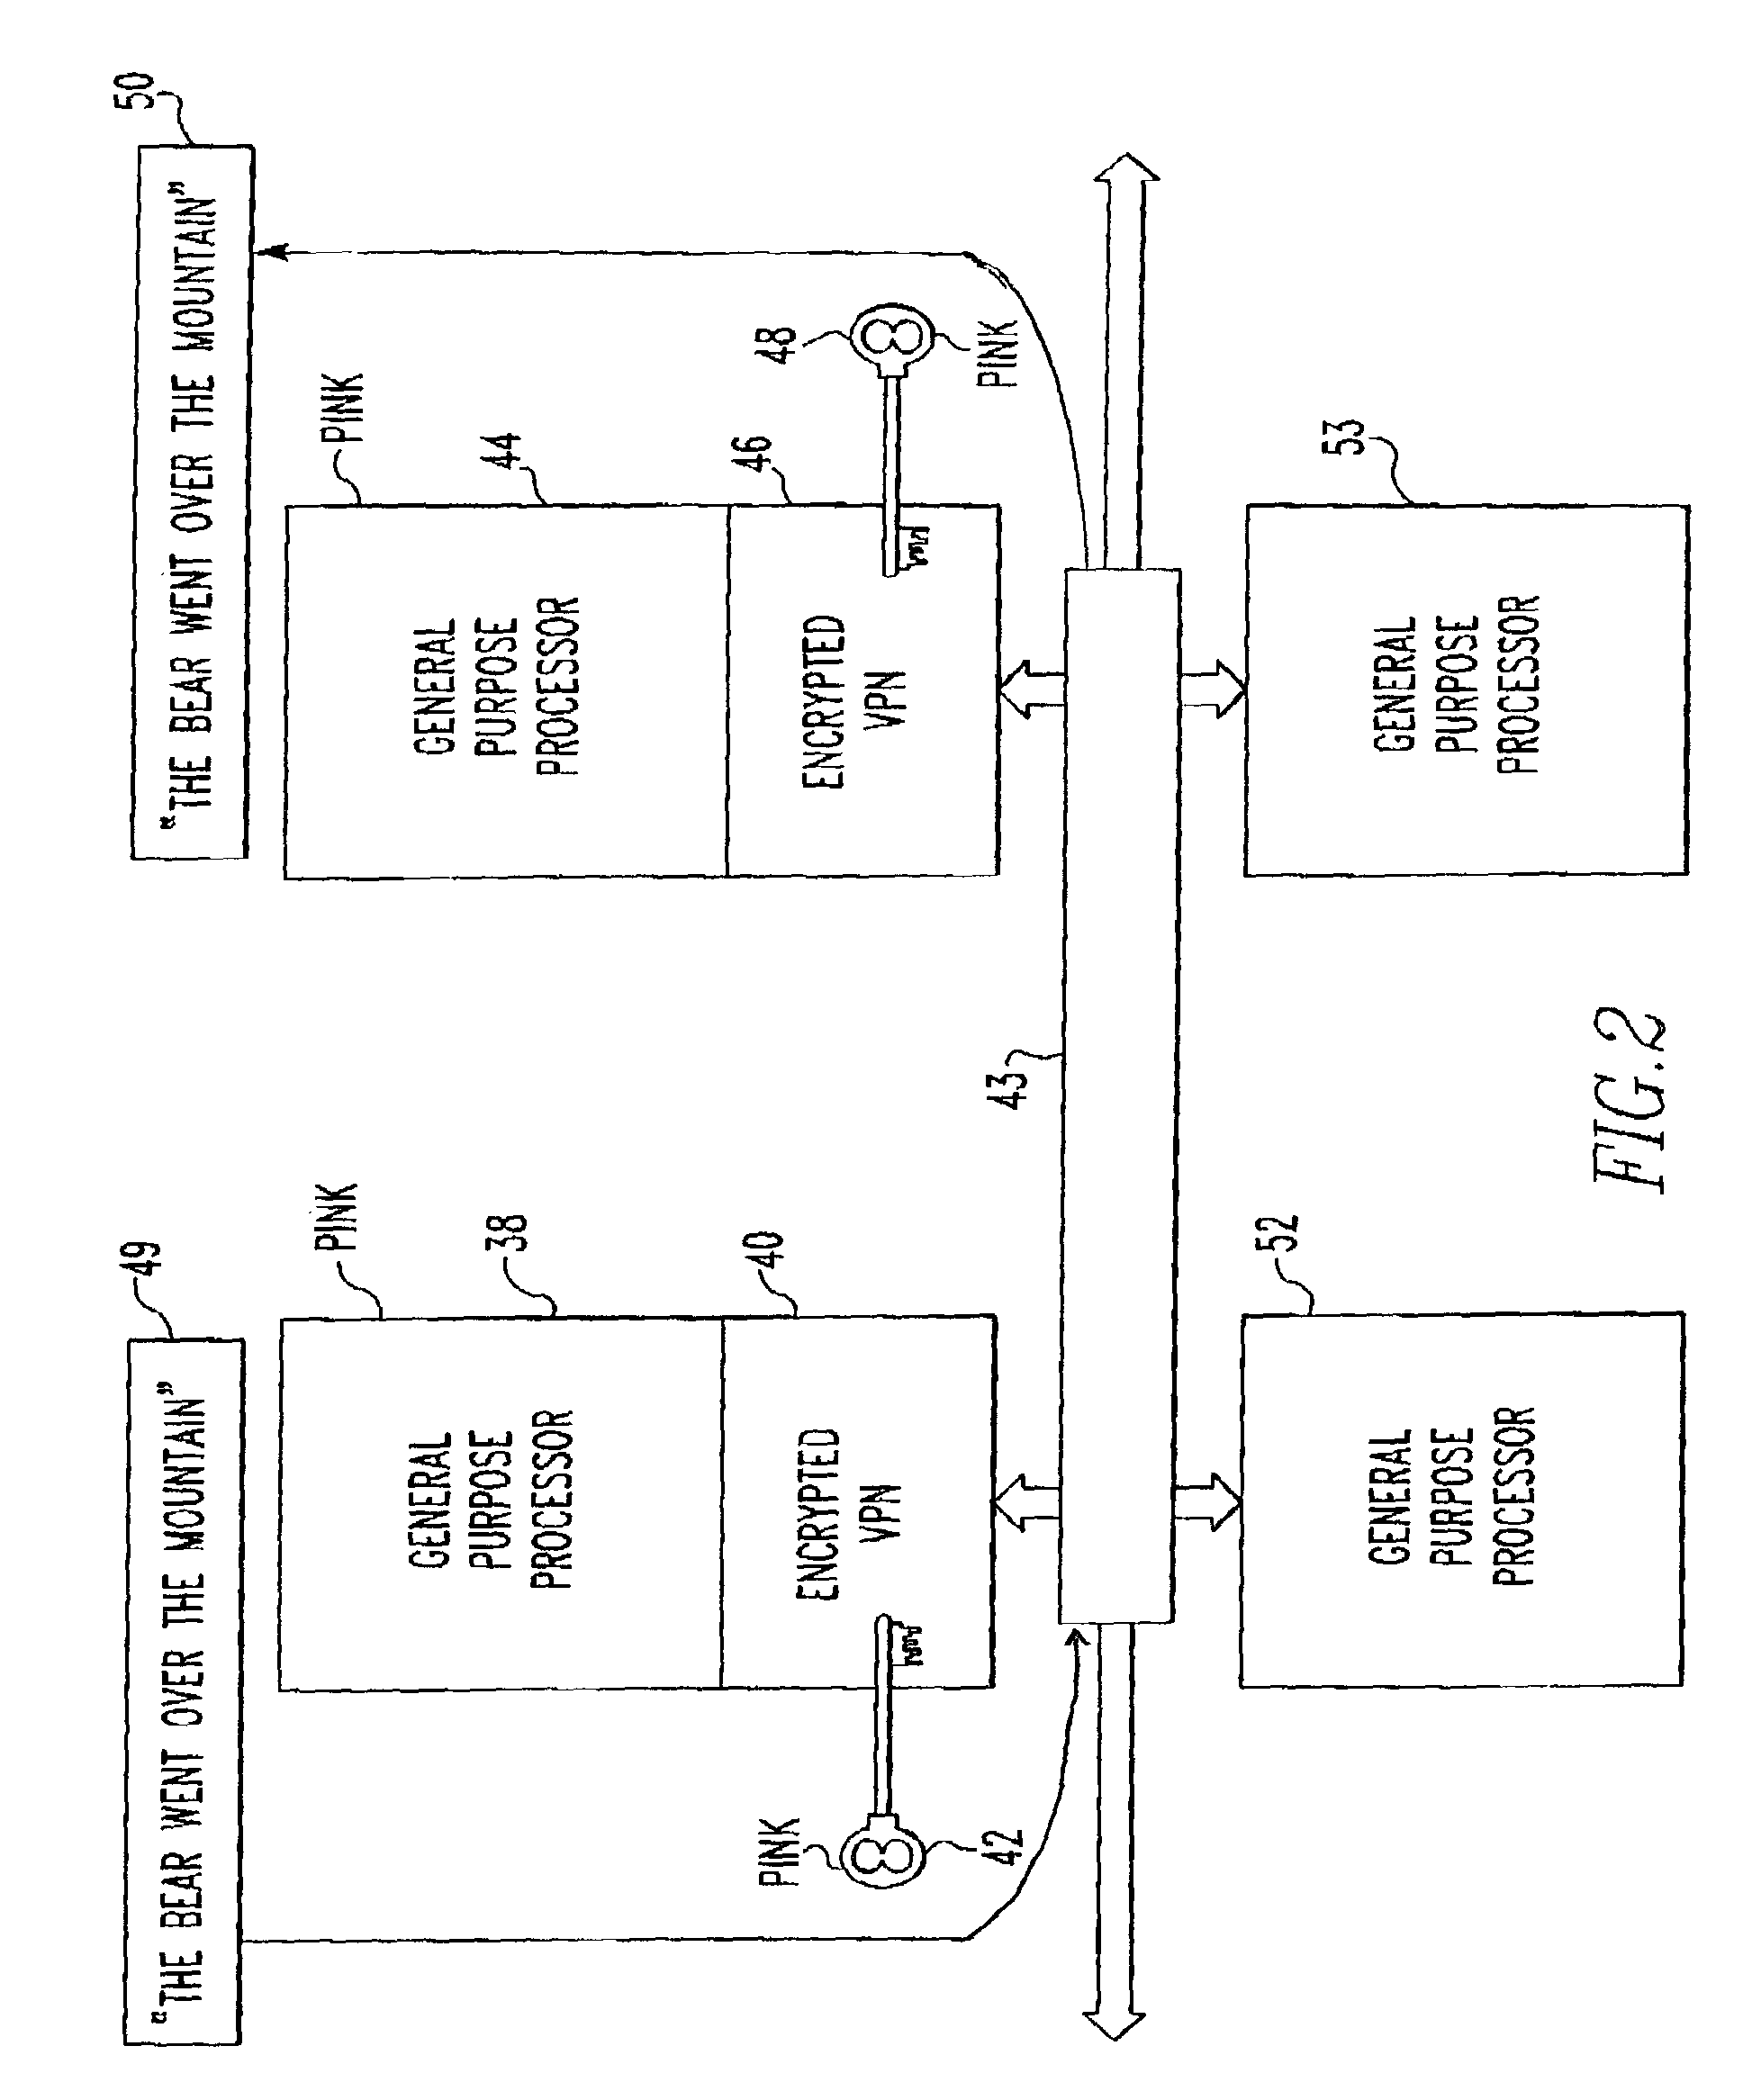 Method and apparatus for multi-level security implementation